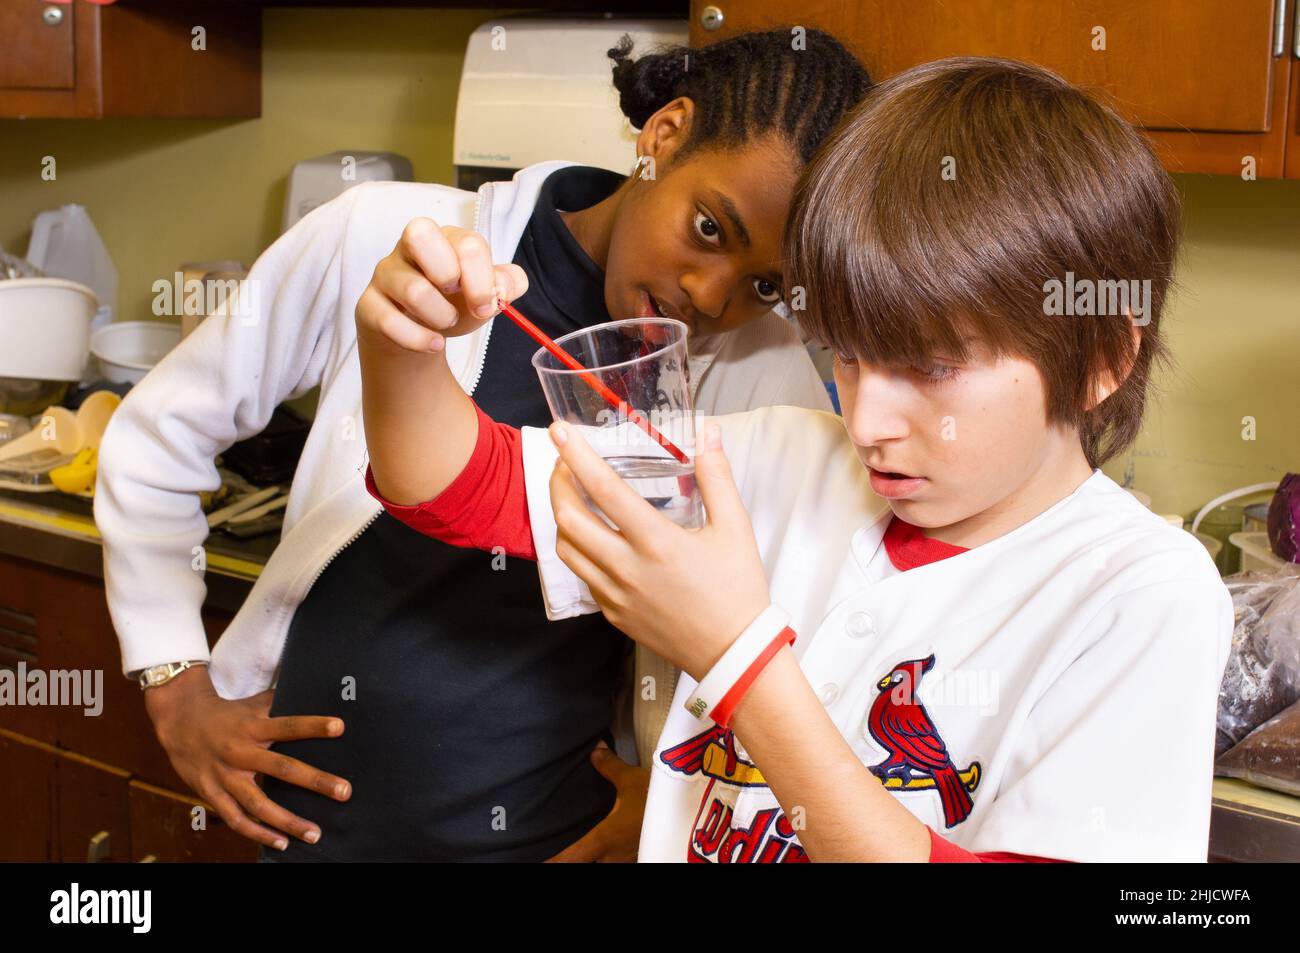 Education Elementary or Middle School Grade 6 science class DNA extraction boy and girl working on experiment Stock Photo